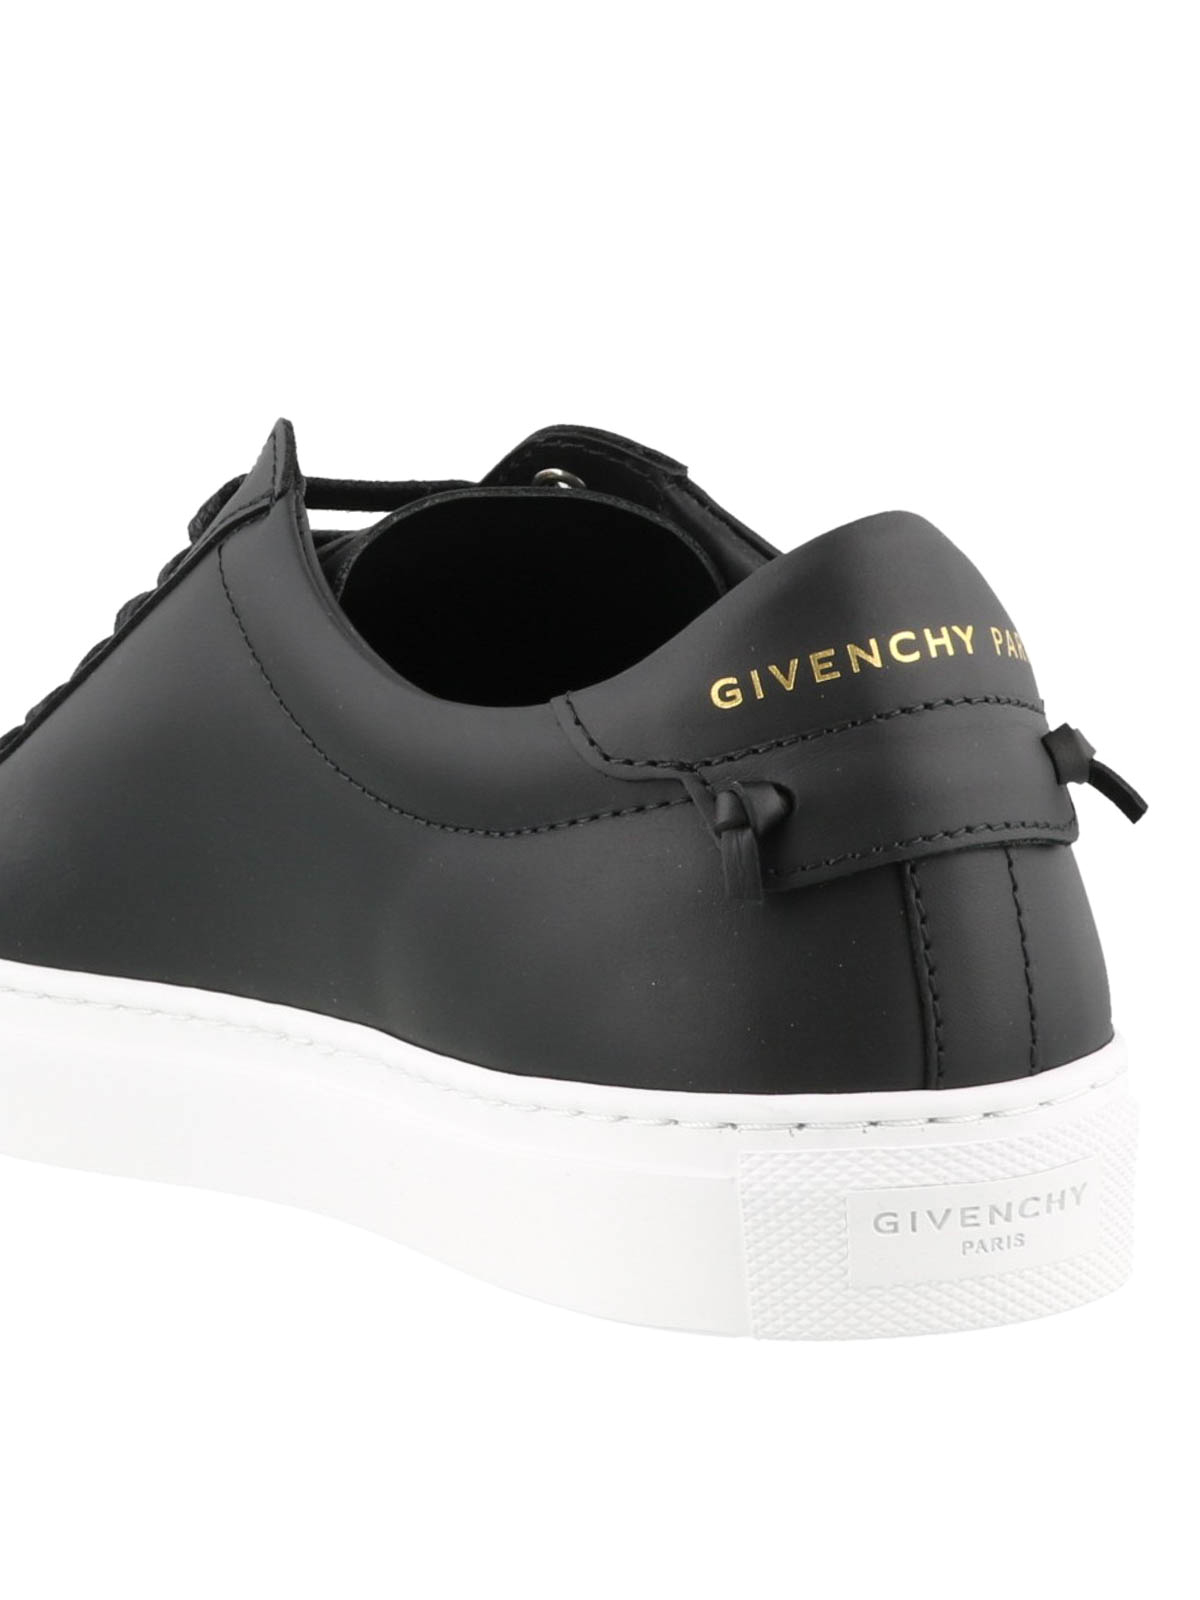 slette kold lav lektier Trainers Givenchy - Urban Street black leather sneakers - BE0003E01W001